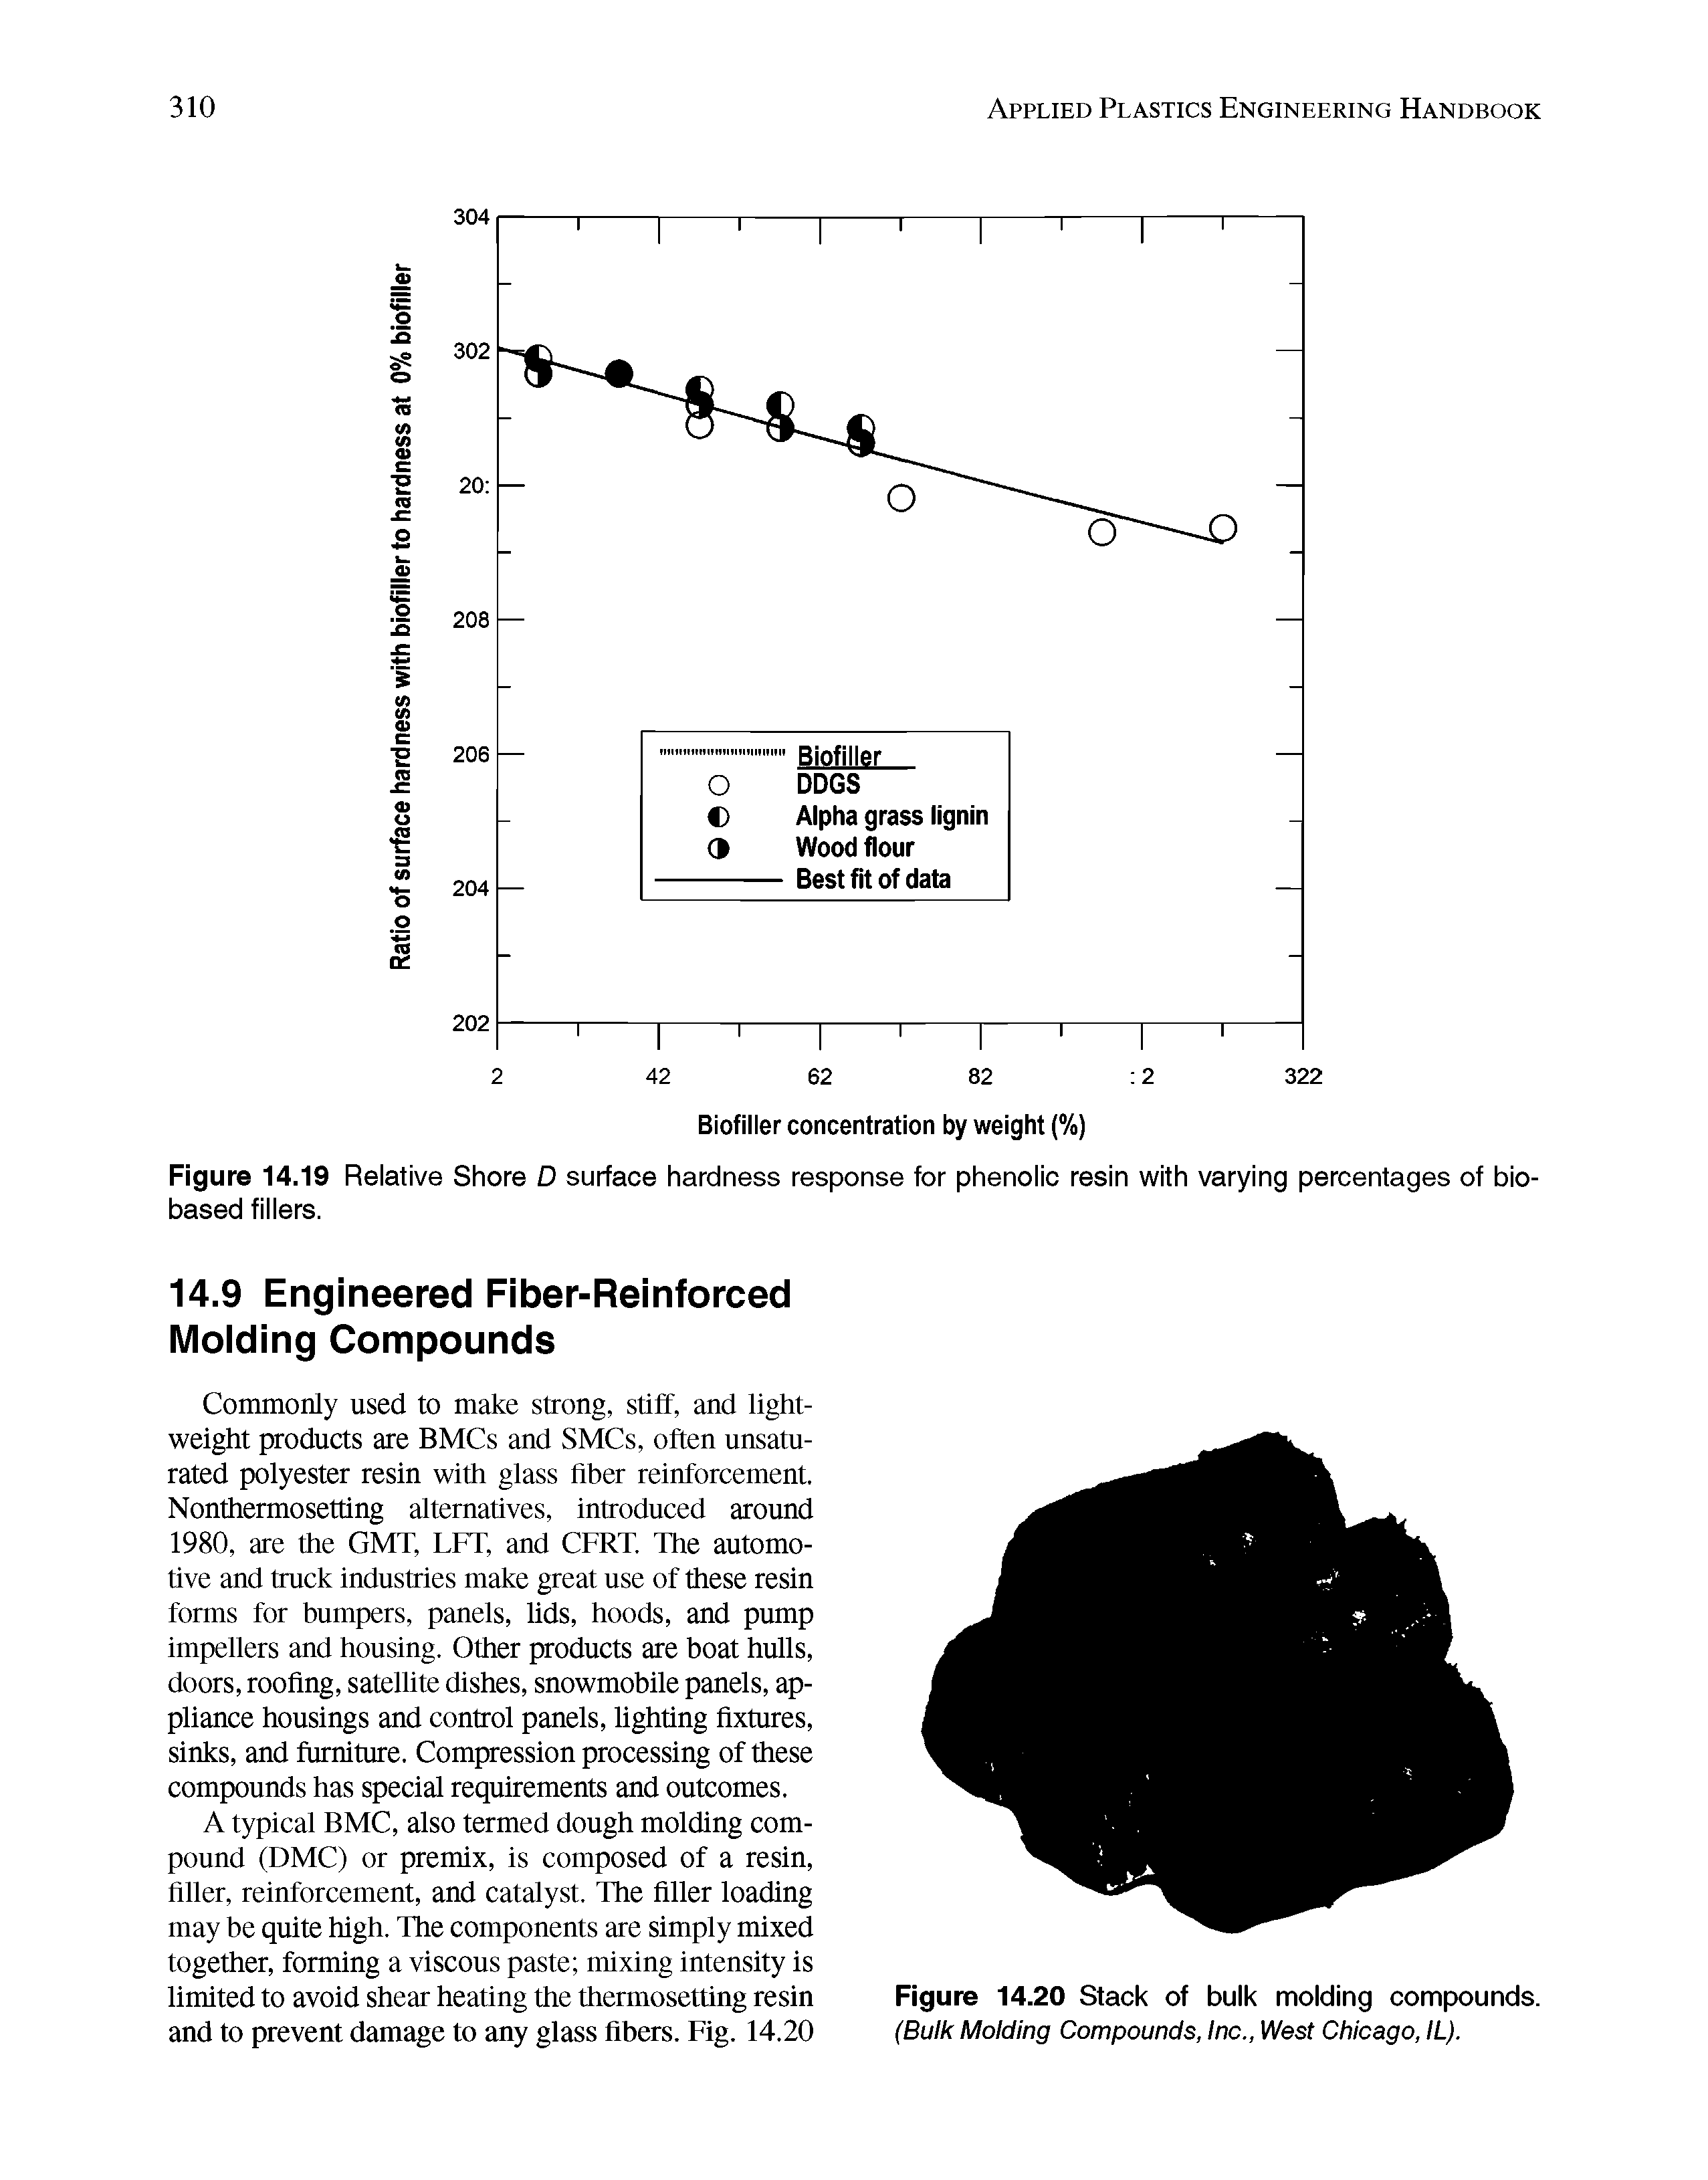 Figure 14.19 Relative Shore D surface hardness response for phenolic resin with varying percentages of biobased fillers.